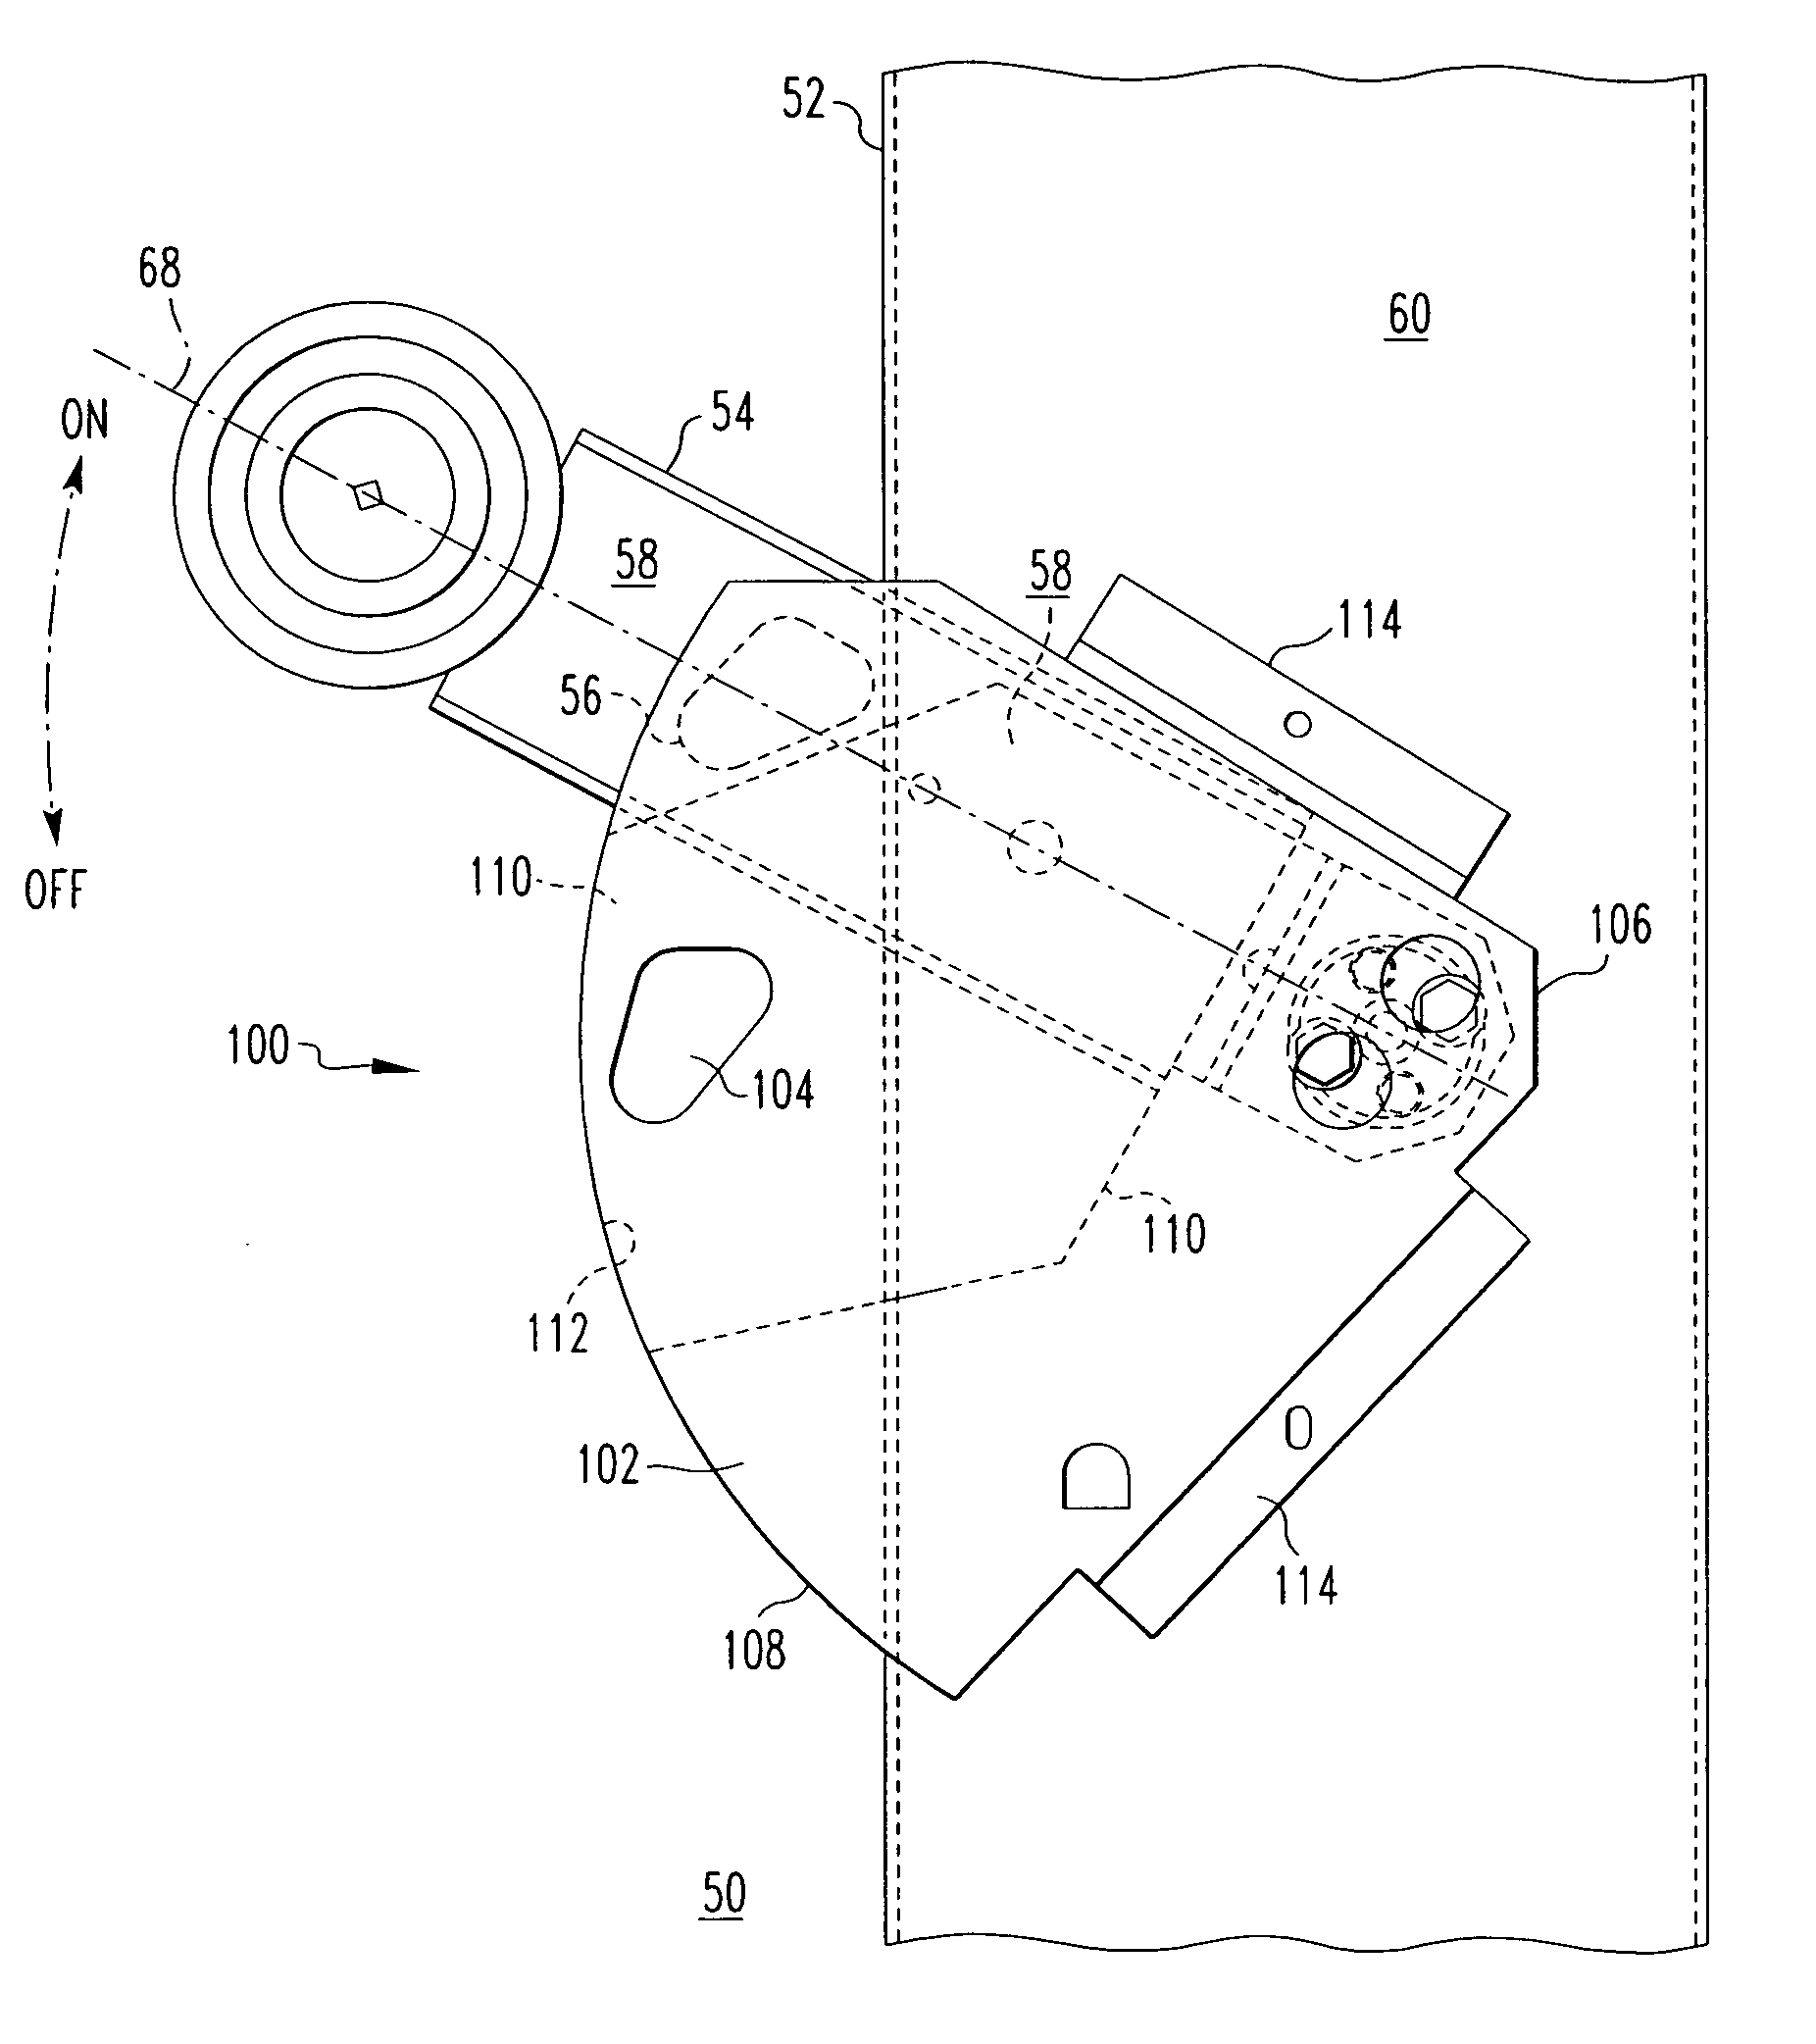 Operating handle locking assembly for an electrical switching apparatus